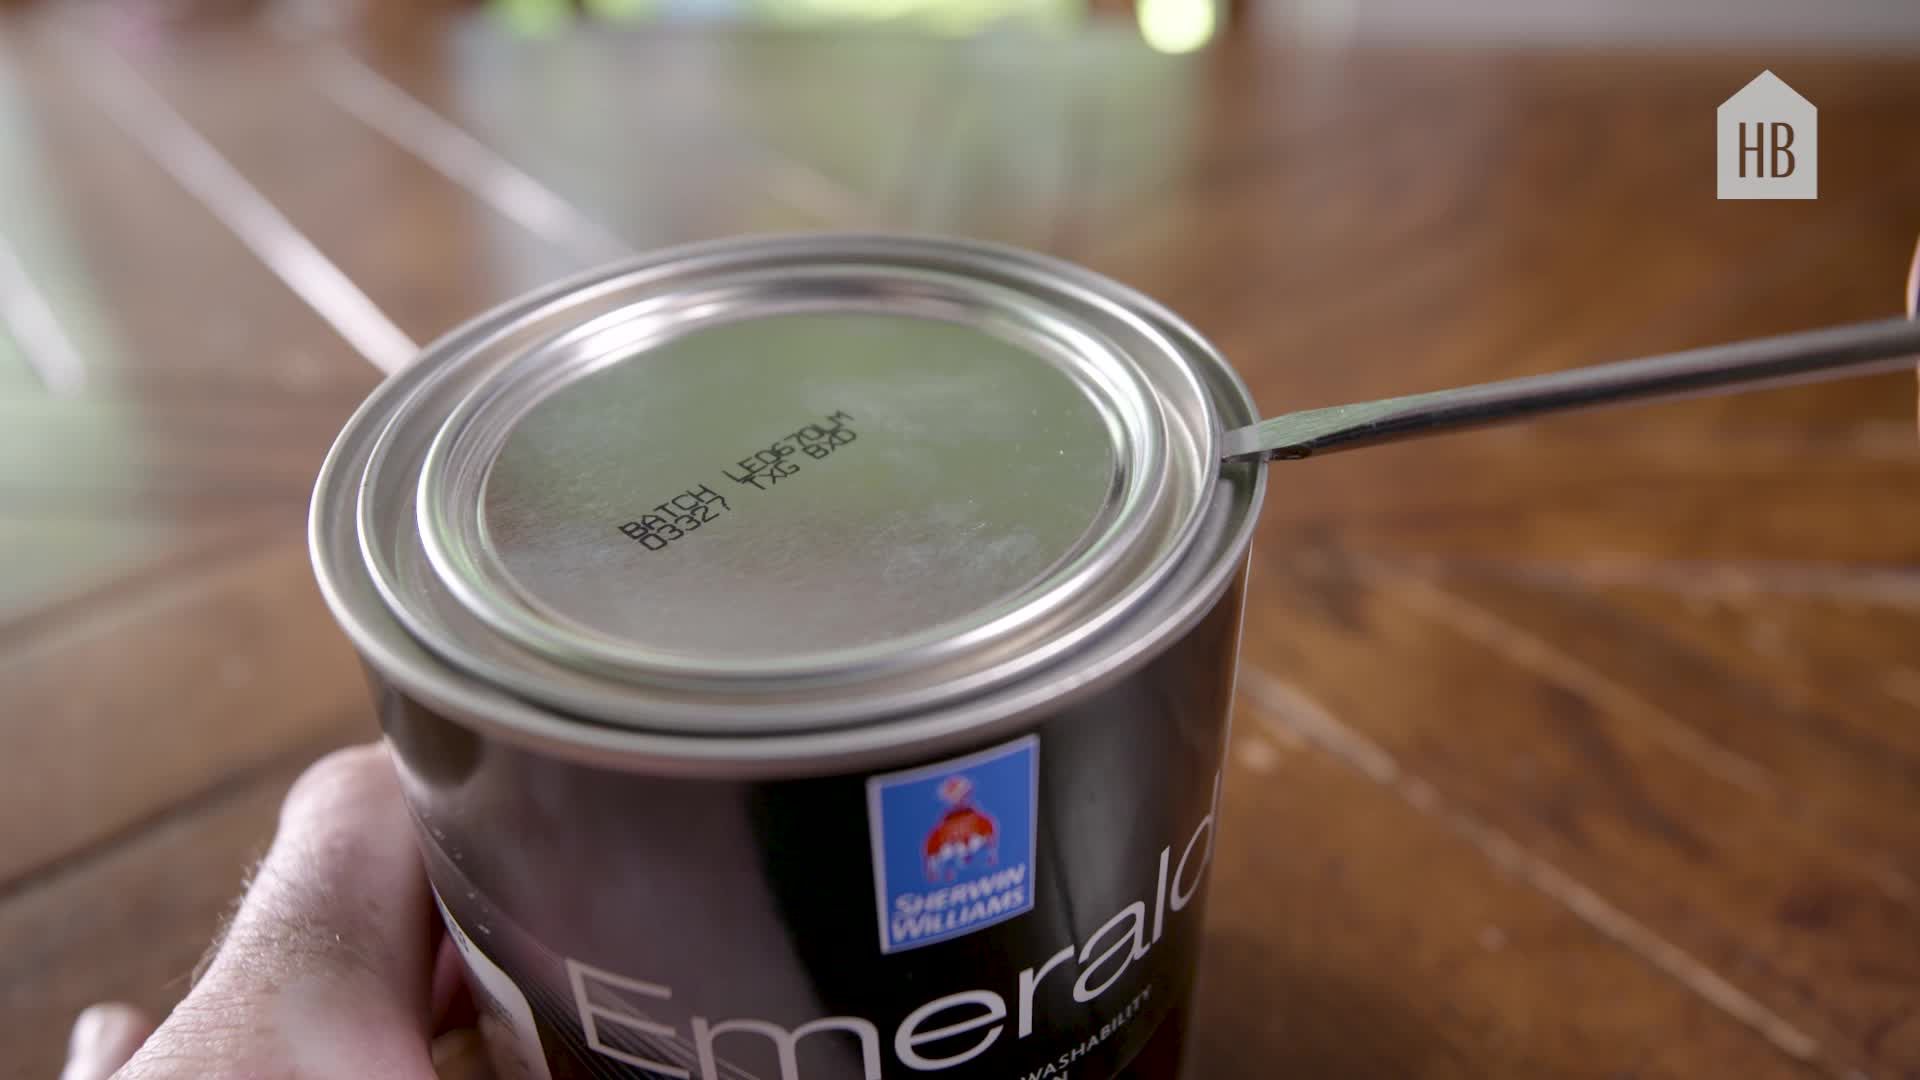 How to Open a Paint Can: Easiest Methods